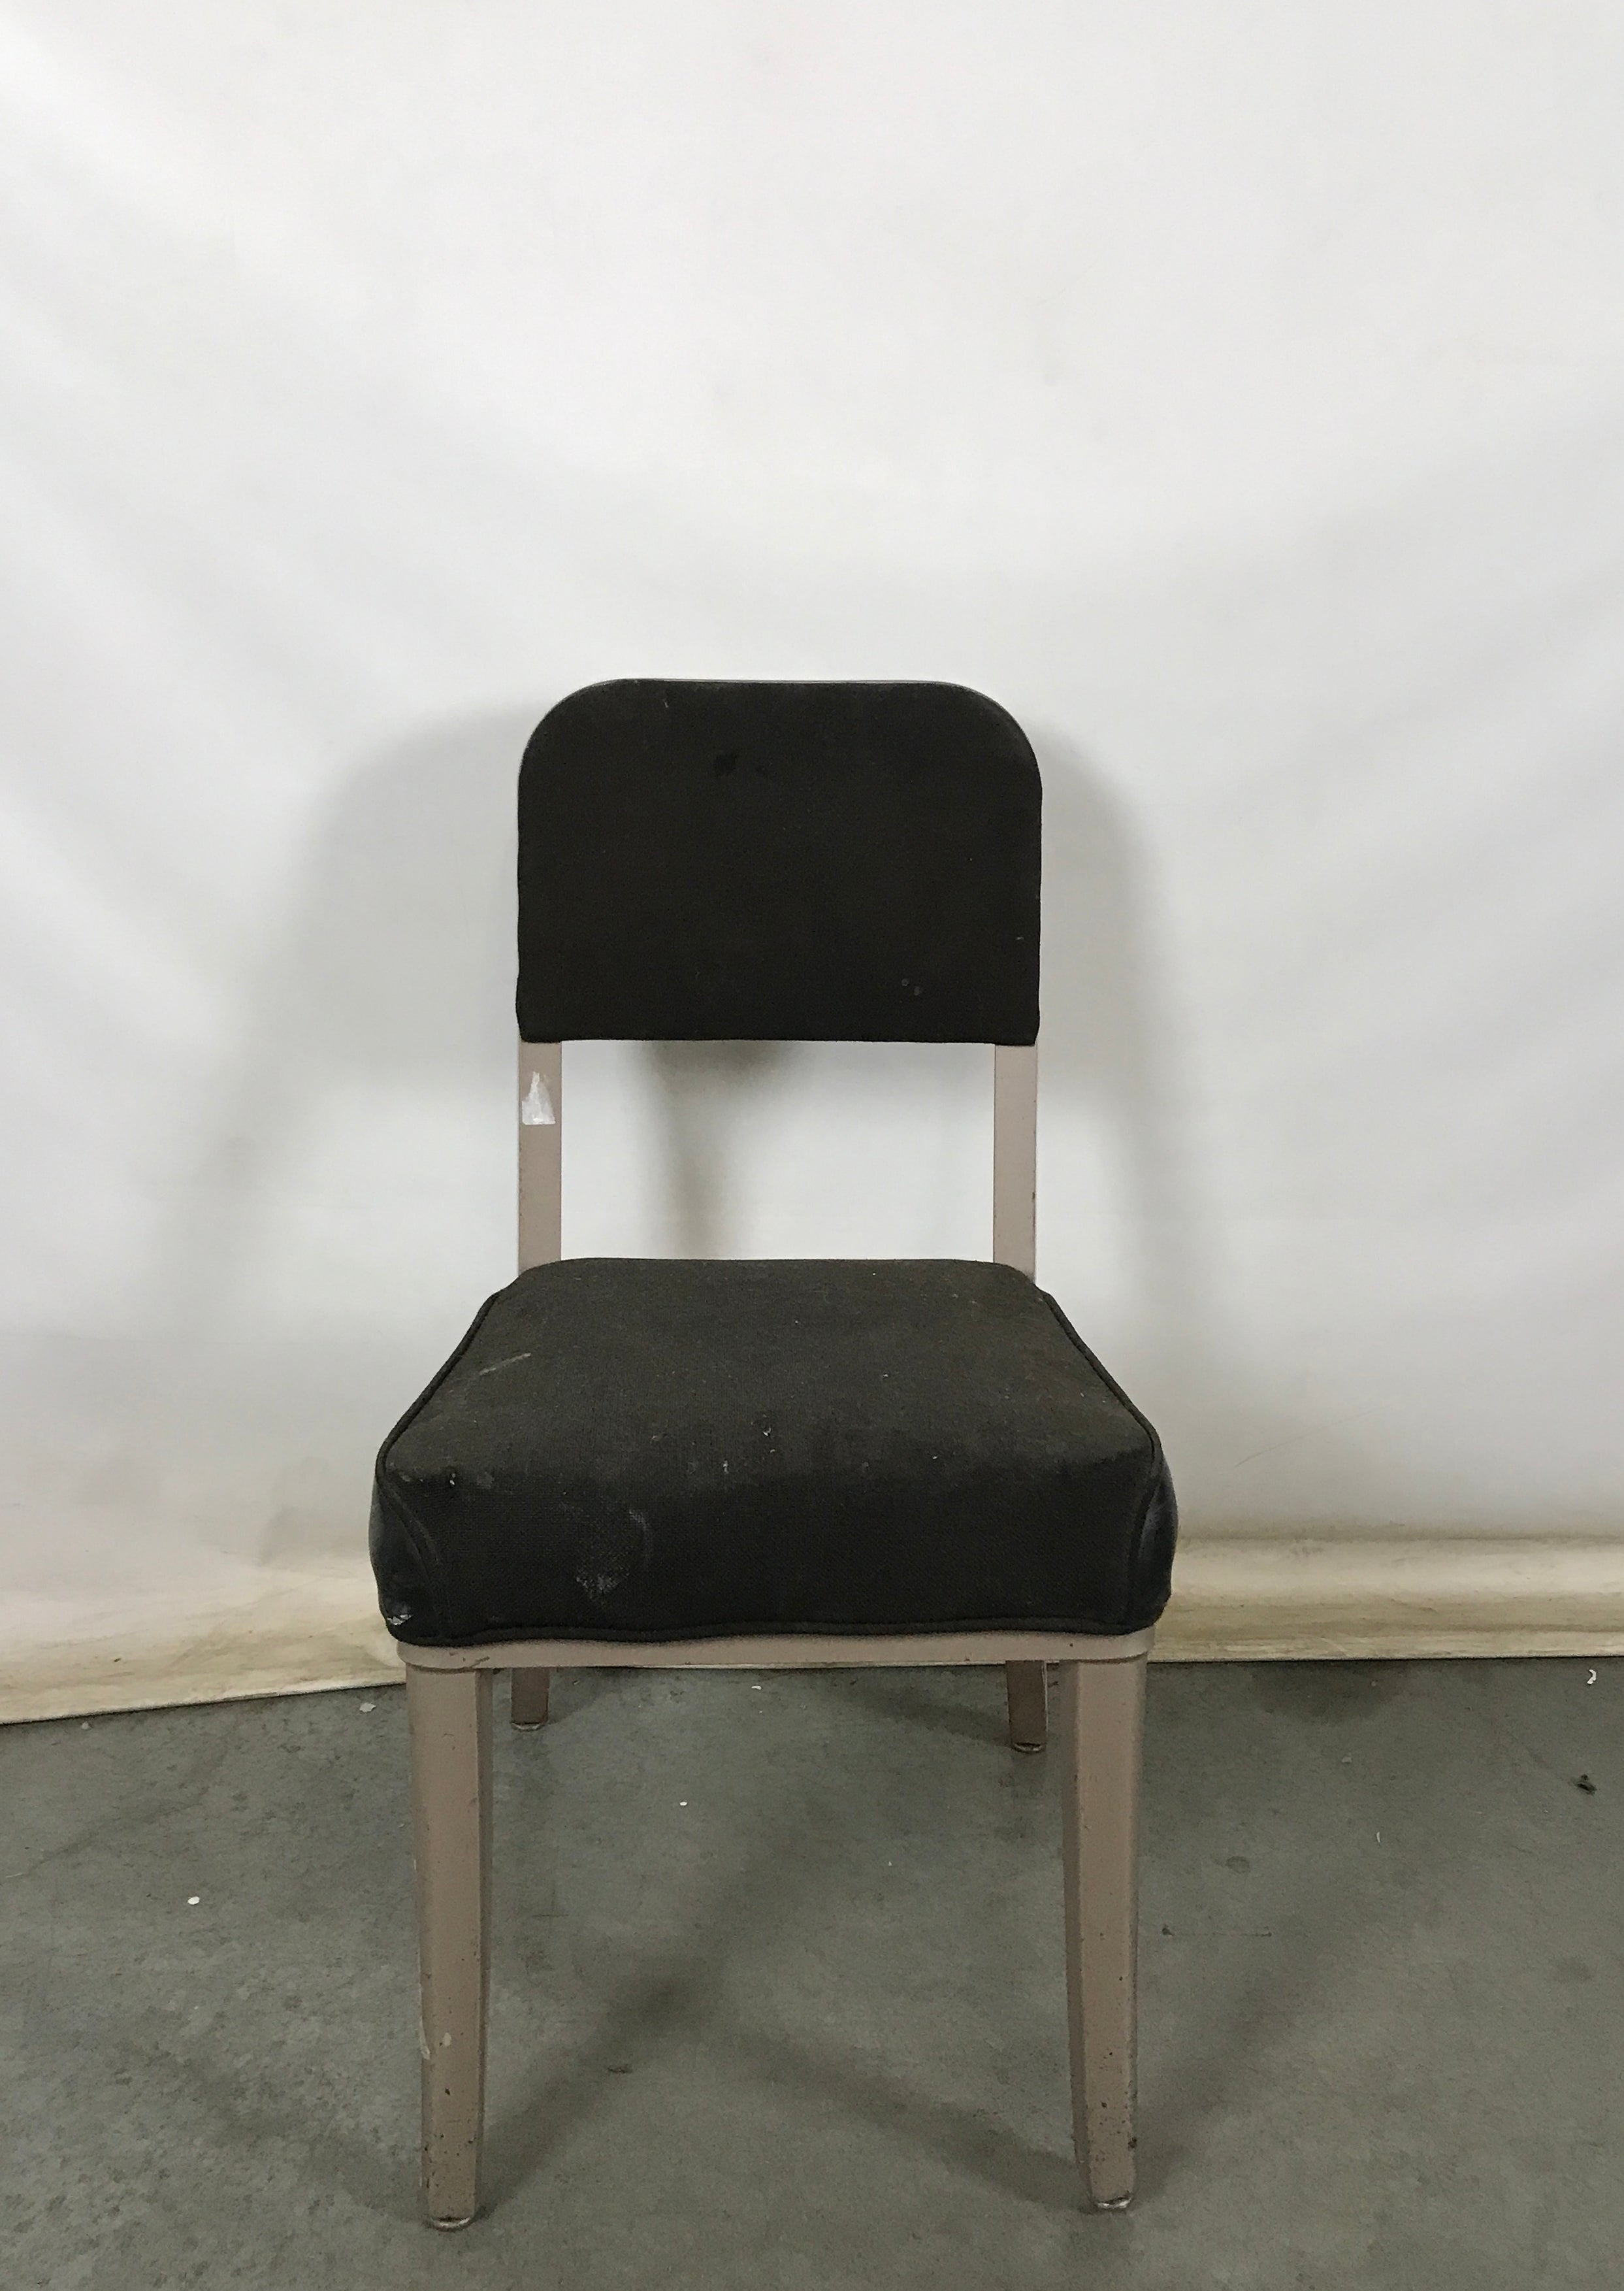 Steelcase Black Upholstered Armless Chair